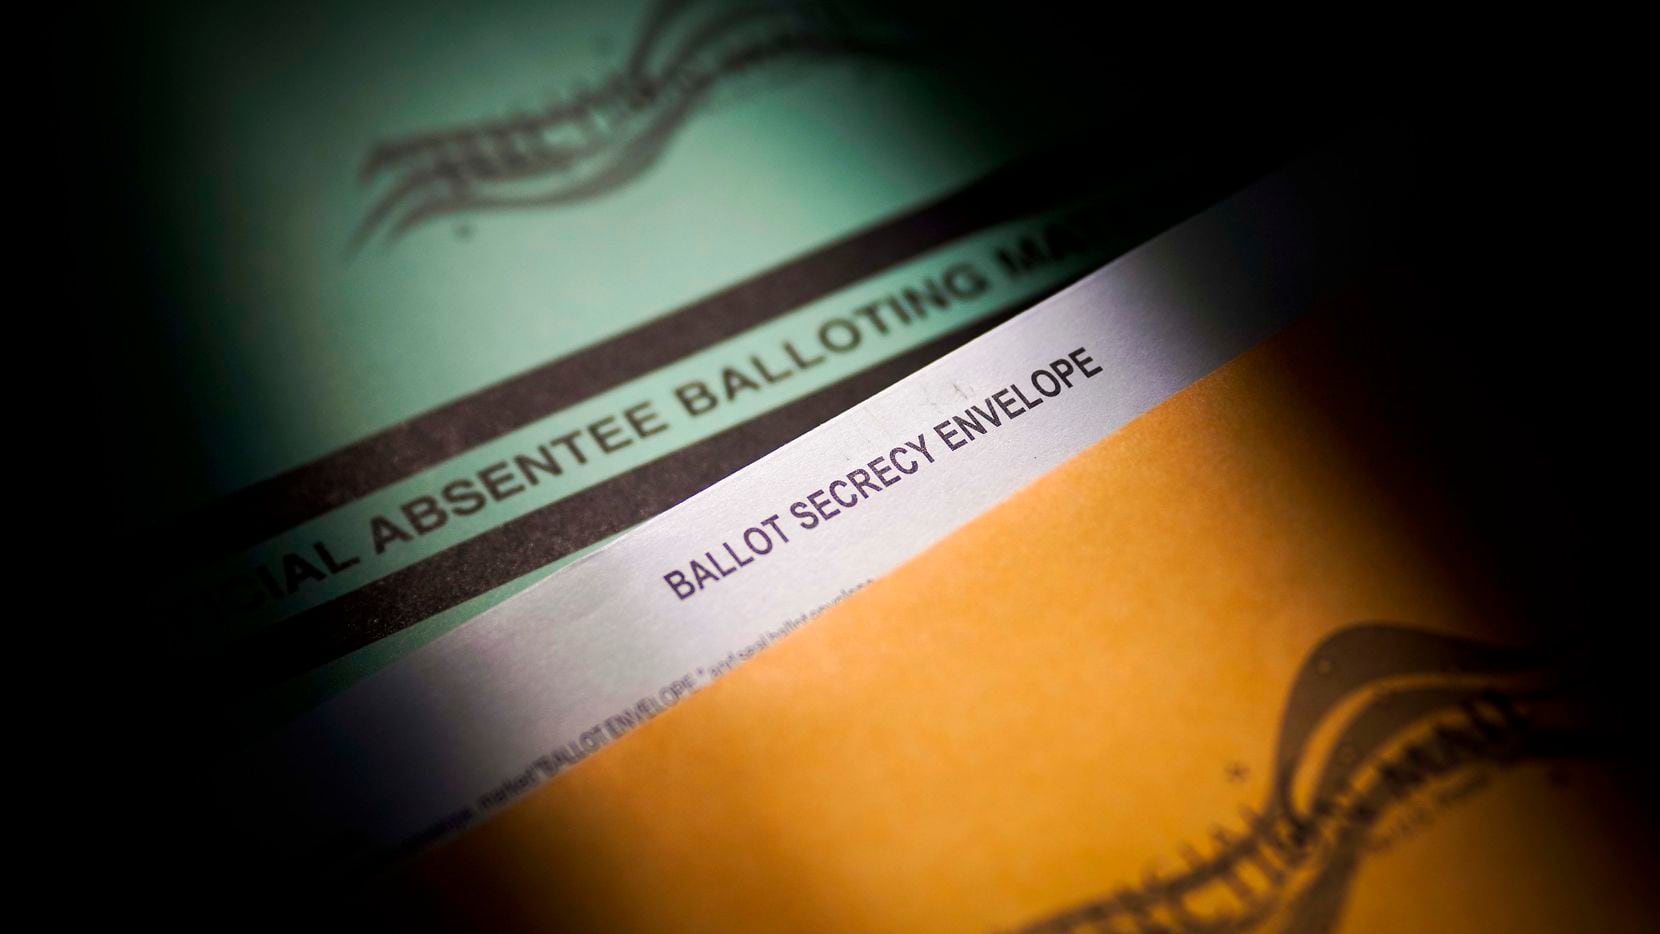 Mail-in absentee ballot materials photographed at the Dallas County Elections Department on Monday, May 18, 2020, in Dallas.